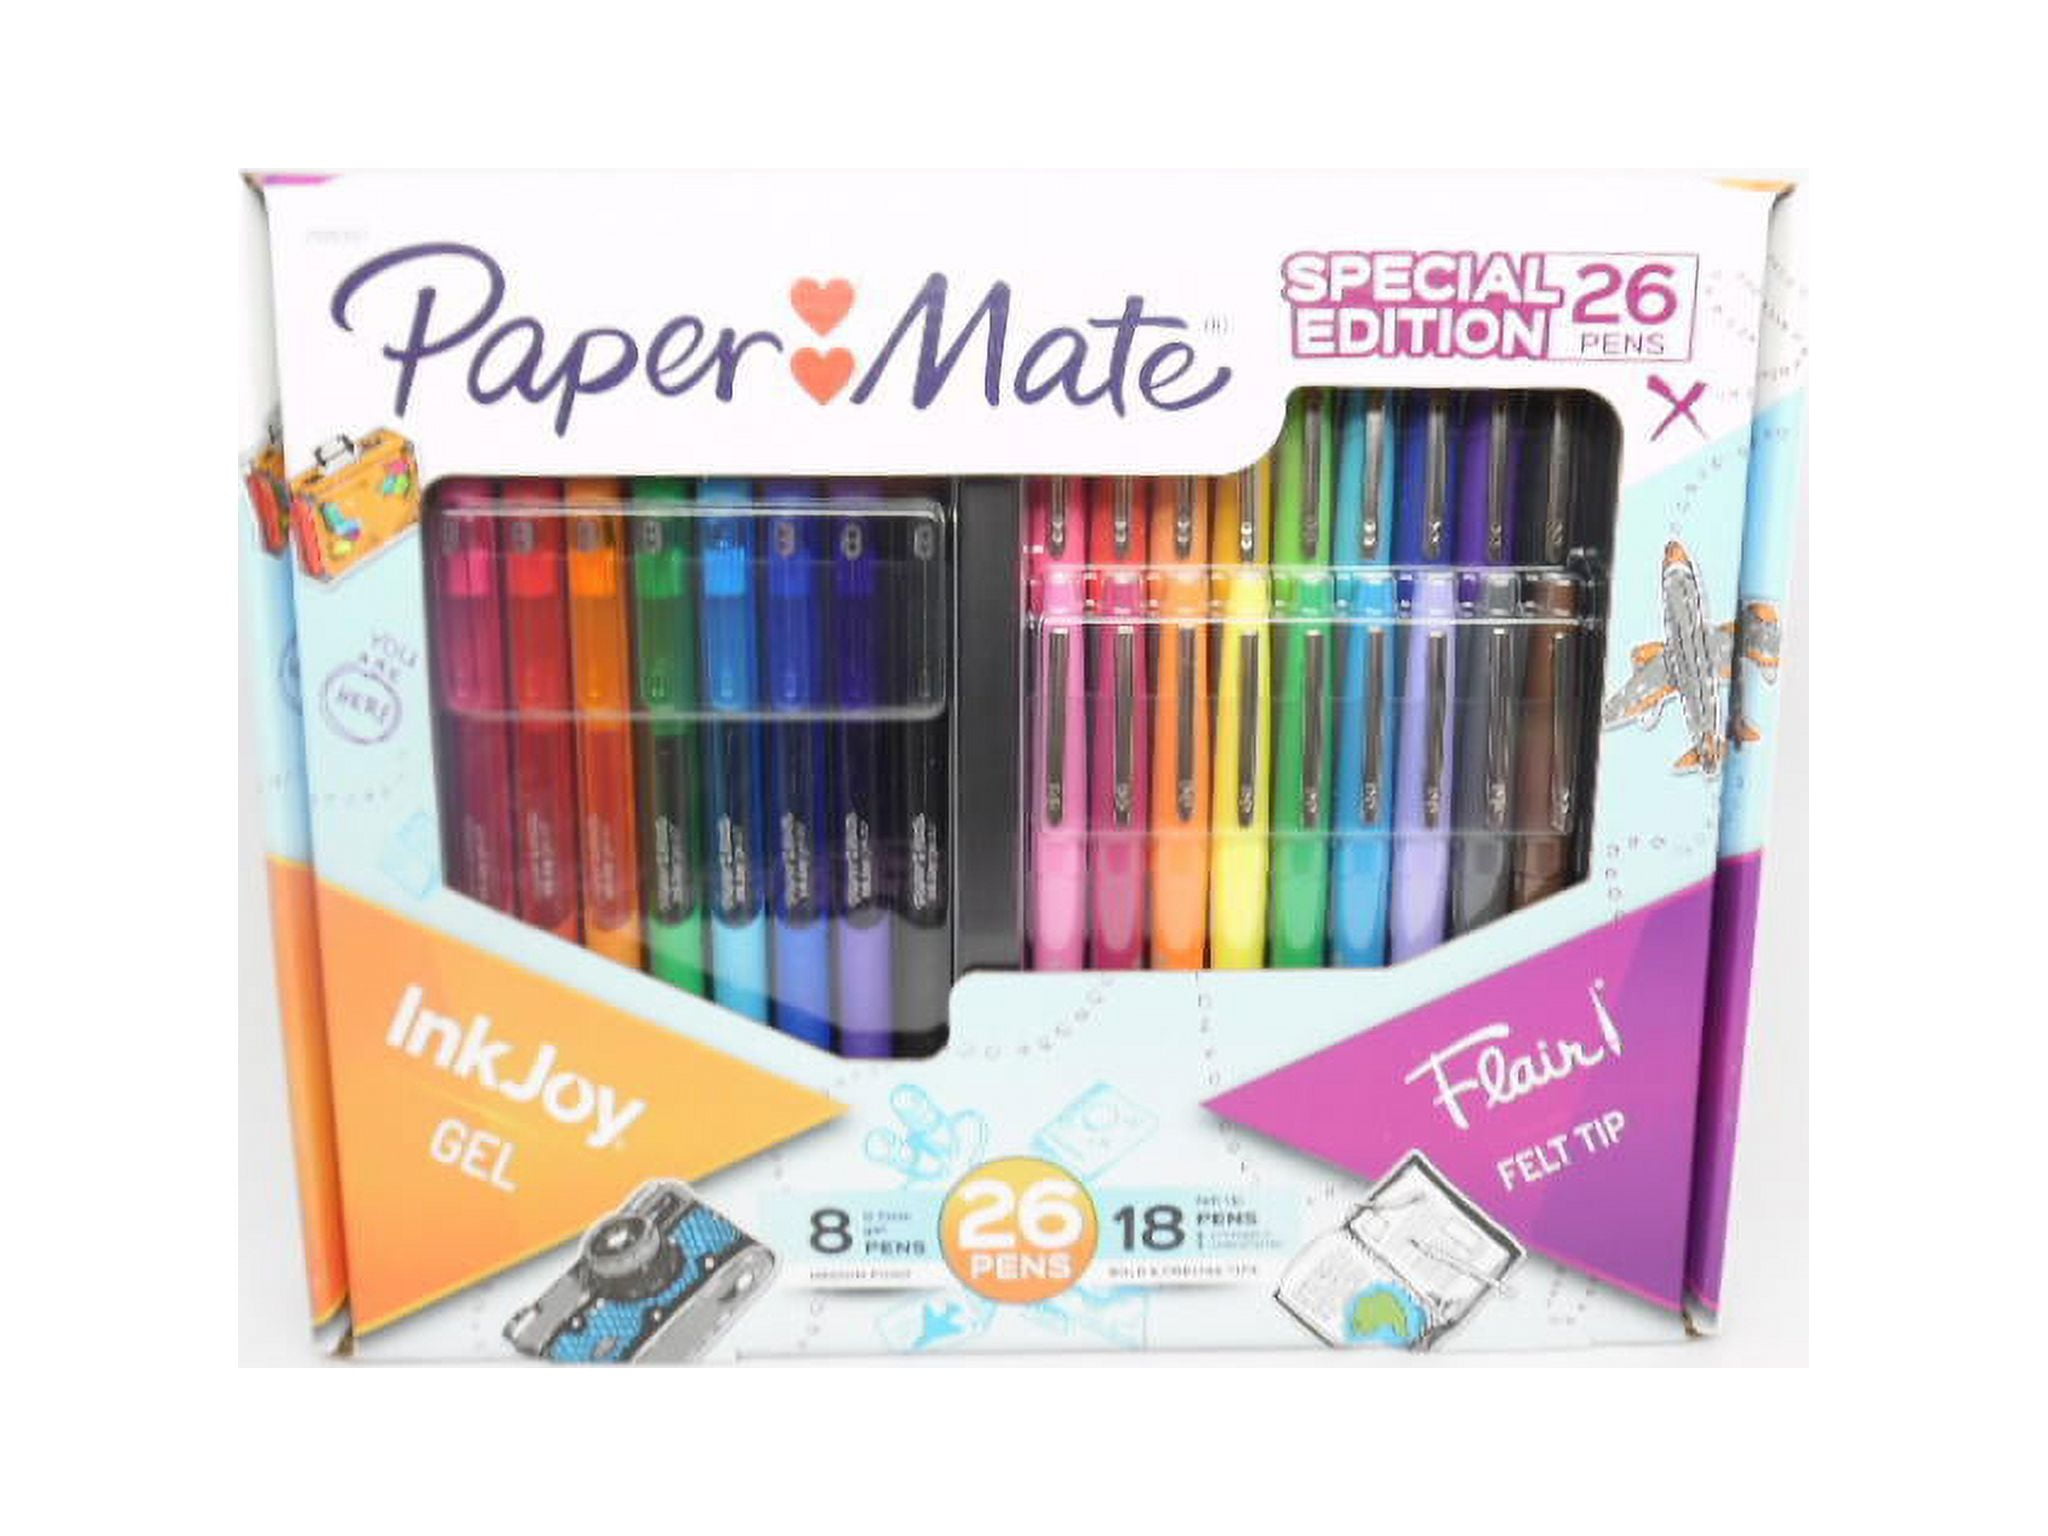 Paper Mate Flair Pen & Inkjoy Gel Pen Adapters for Cricut Machines